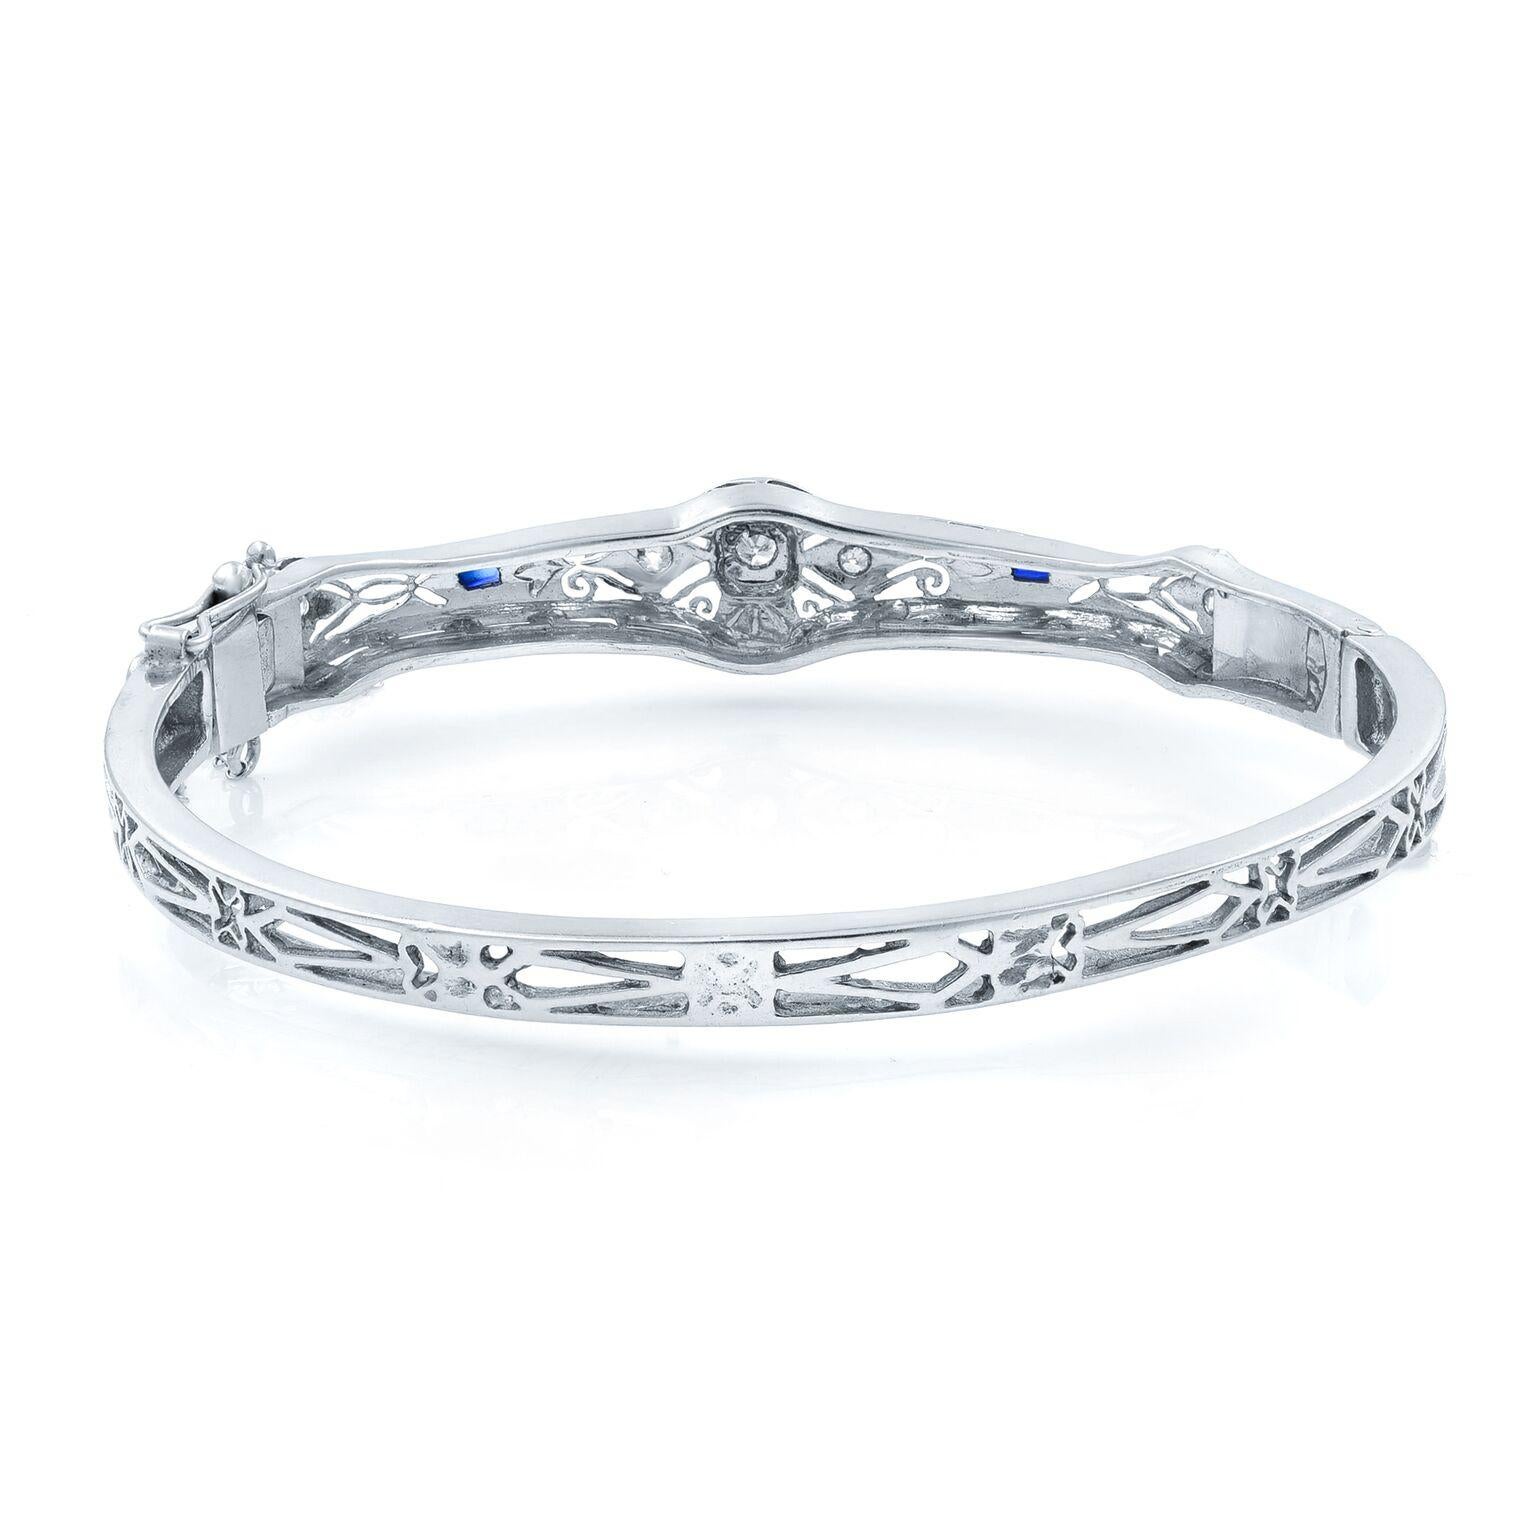 Diamond 0.15ctw & Blue Sapphire 0.05ctw Filigree Ladies Bracelet 14K White Gold In New Condition For Sale In New York, NY